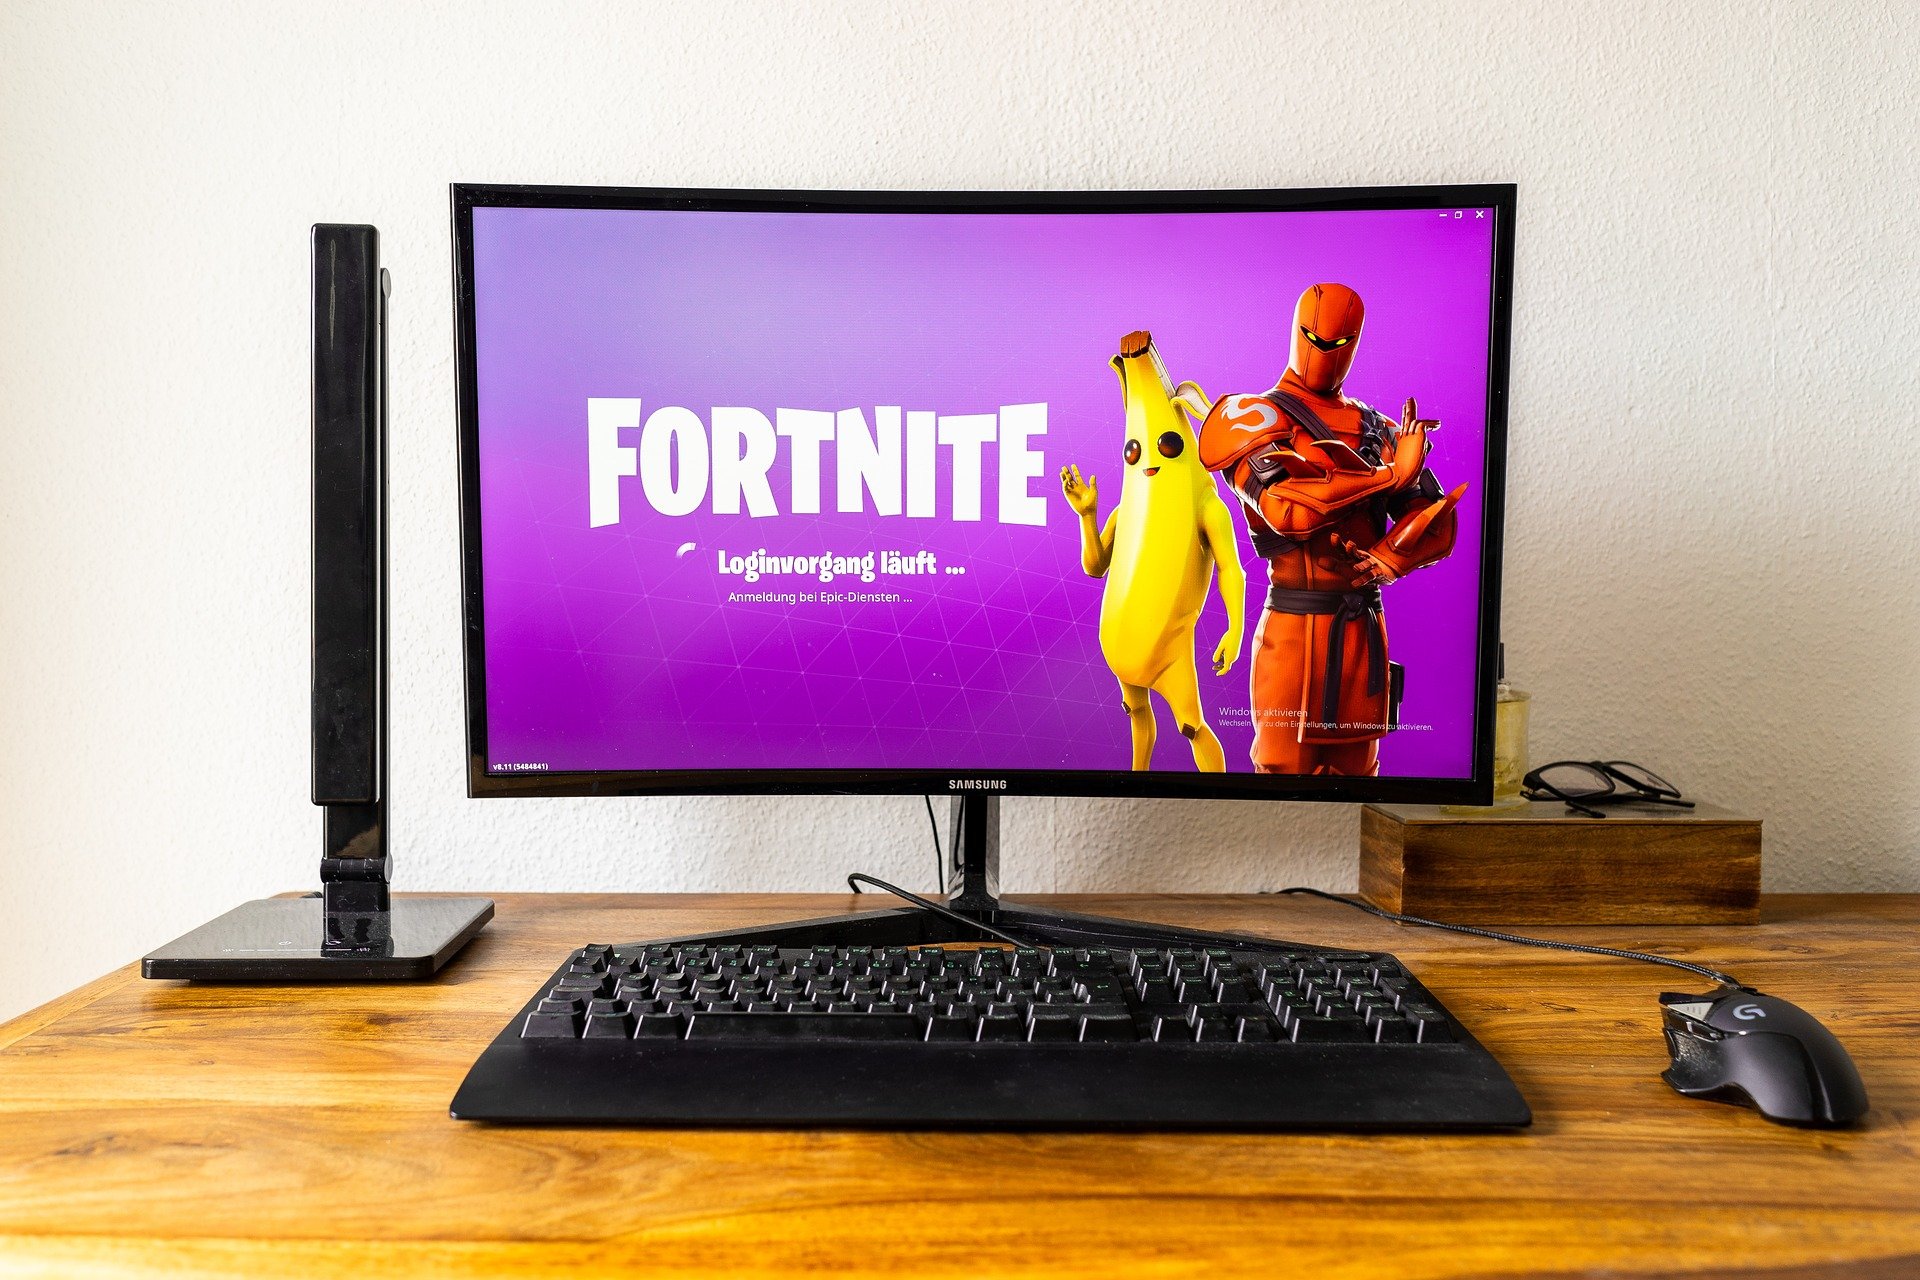 Fortnite system requirements for PC